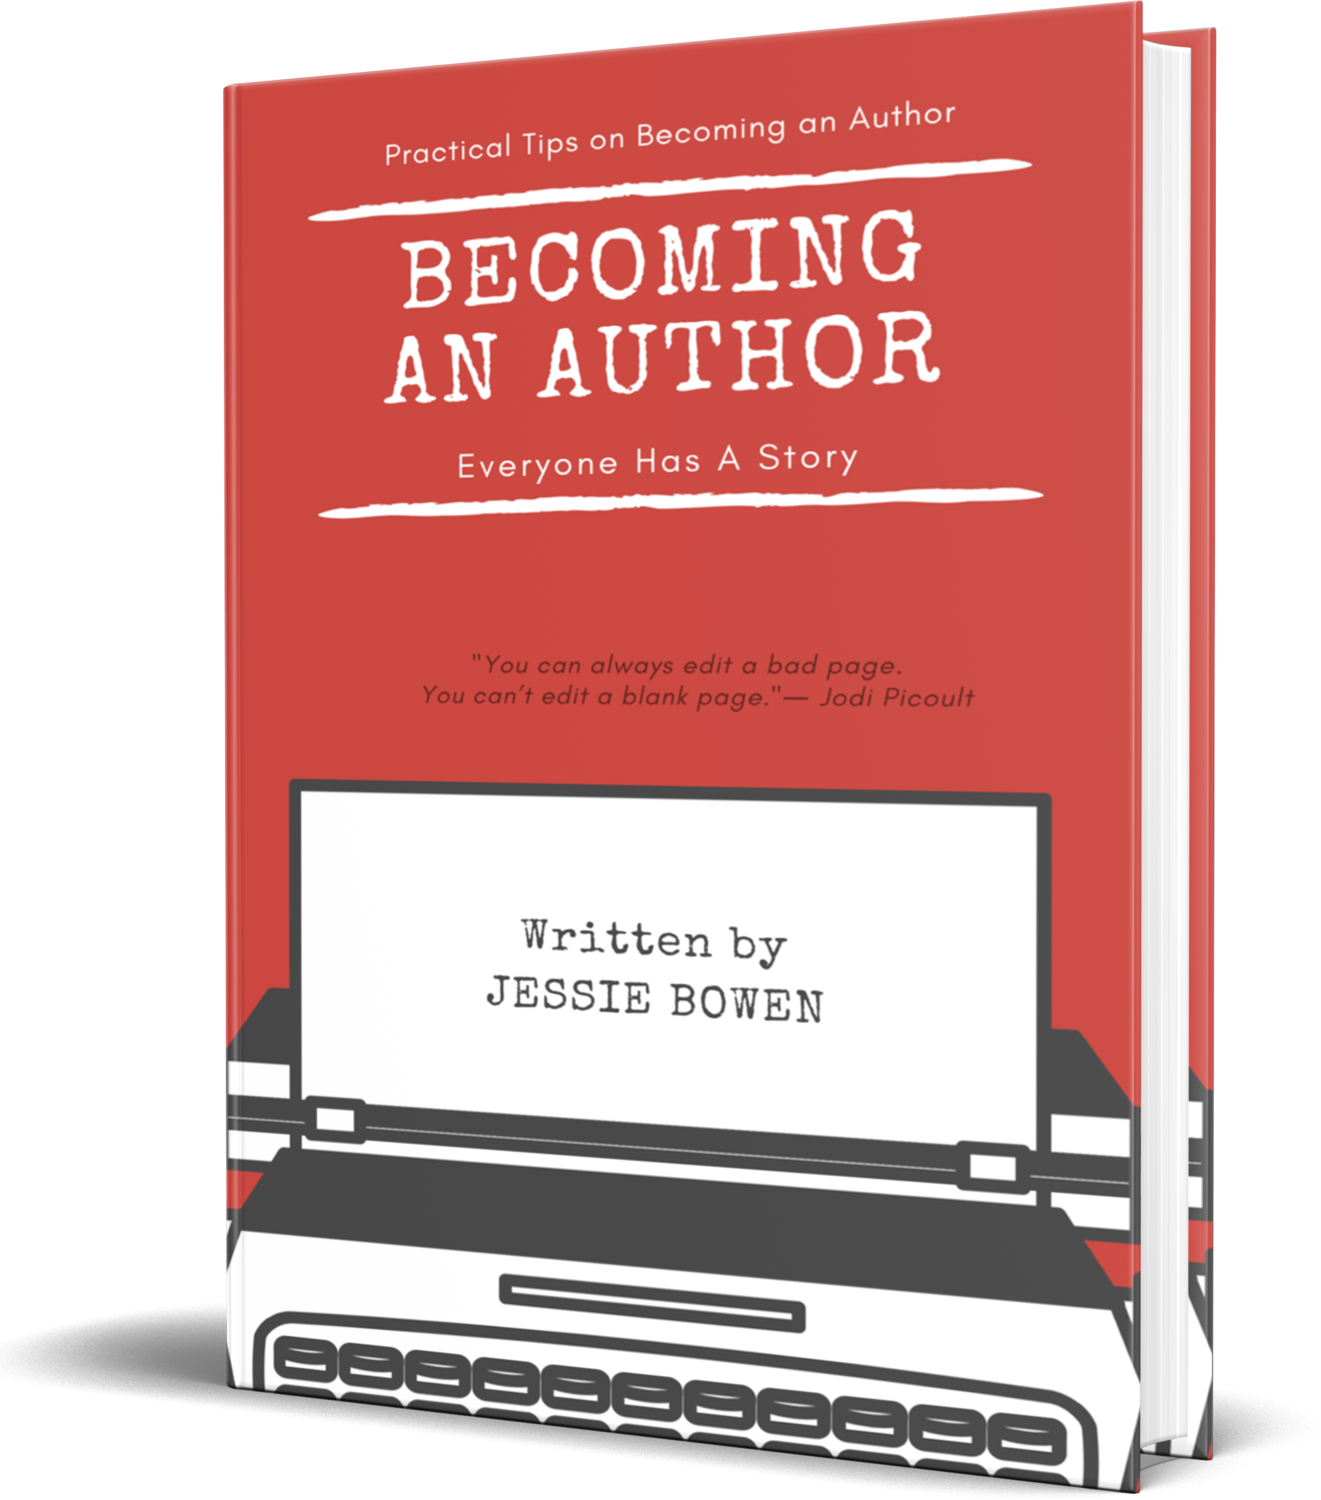 BECOMING AN AUTHOR: Everyone Has A Story